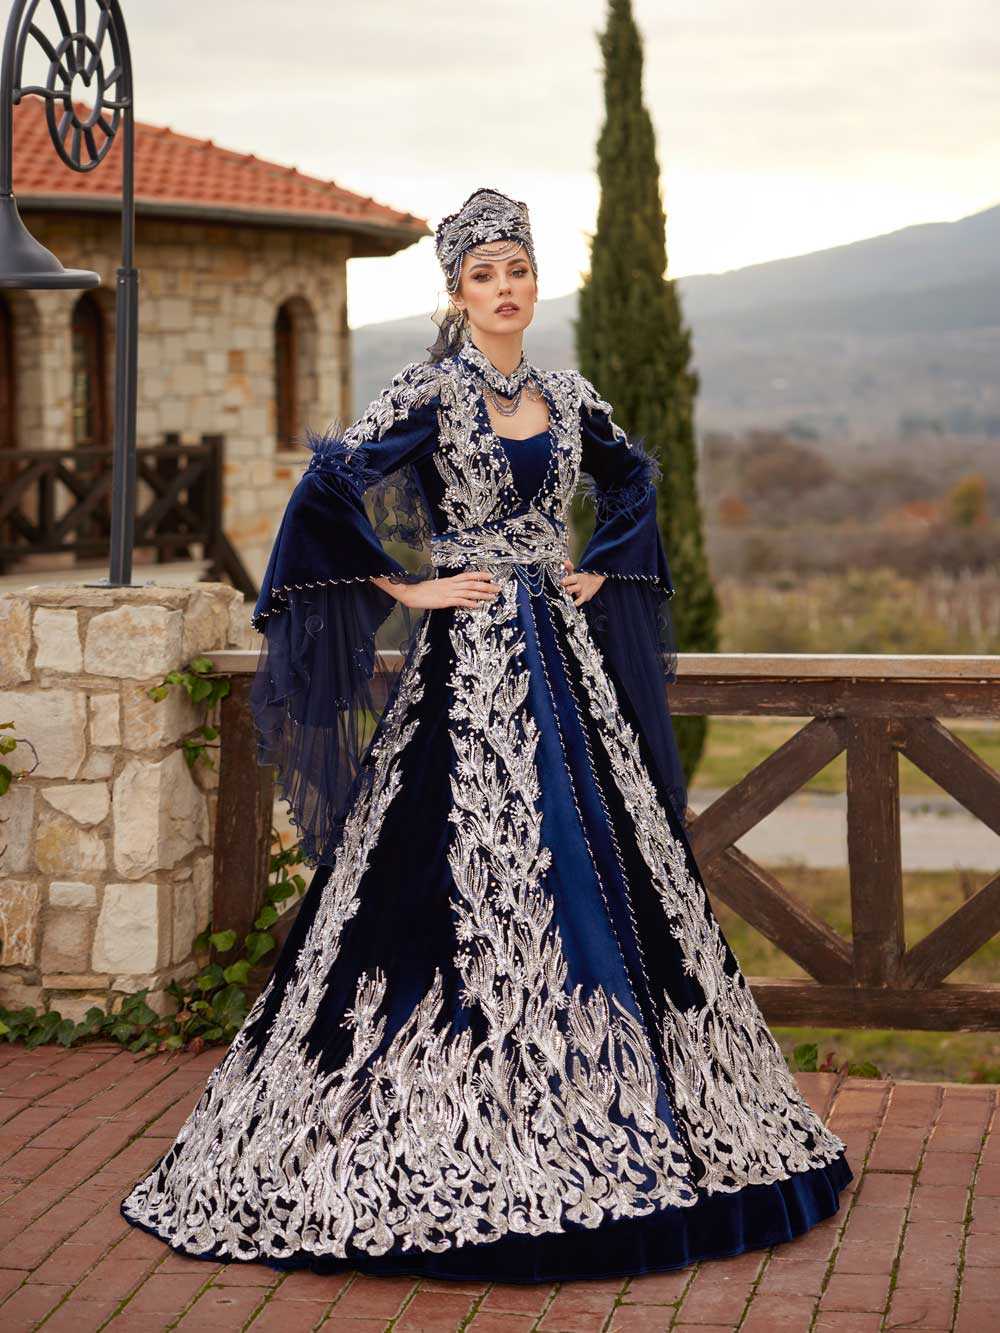 buy Navy Blue Velvet Heavily Silver Embroidered Long Bell Sleeve Turkish Wedding Henna Bridal Caftan Gown Dress online henna party gowns